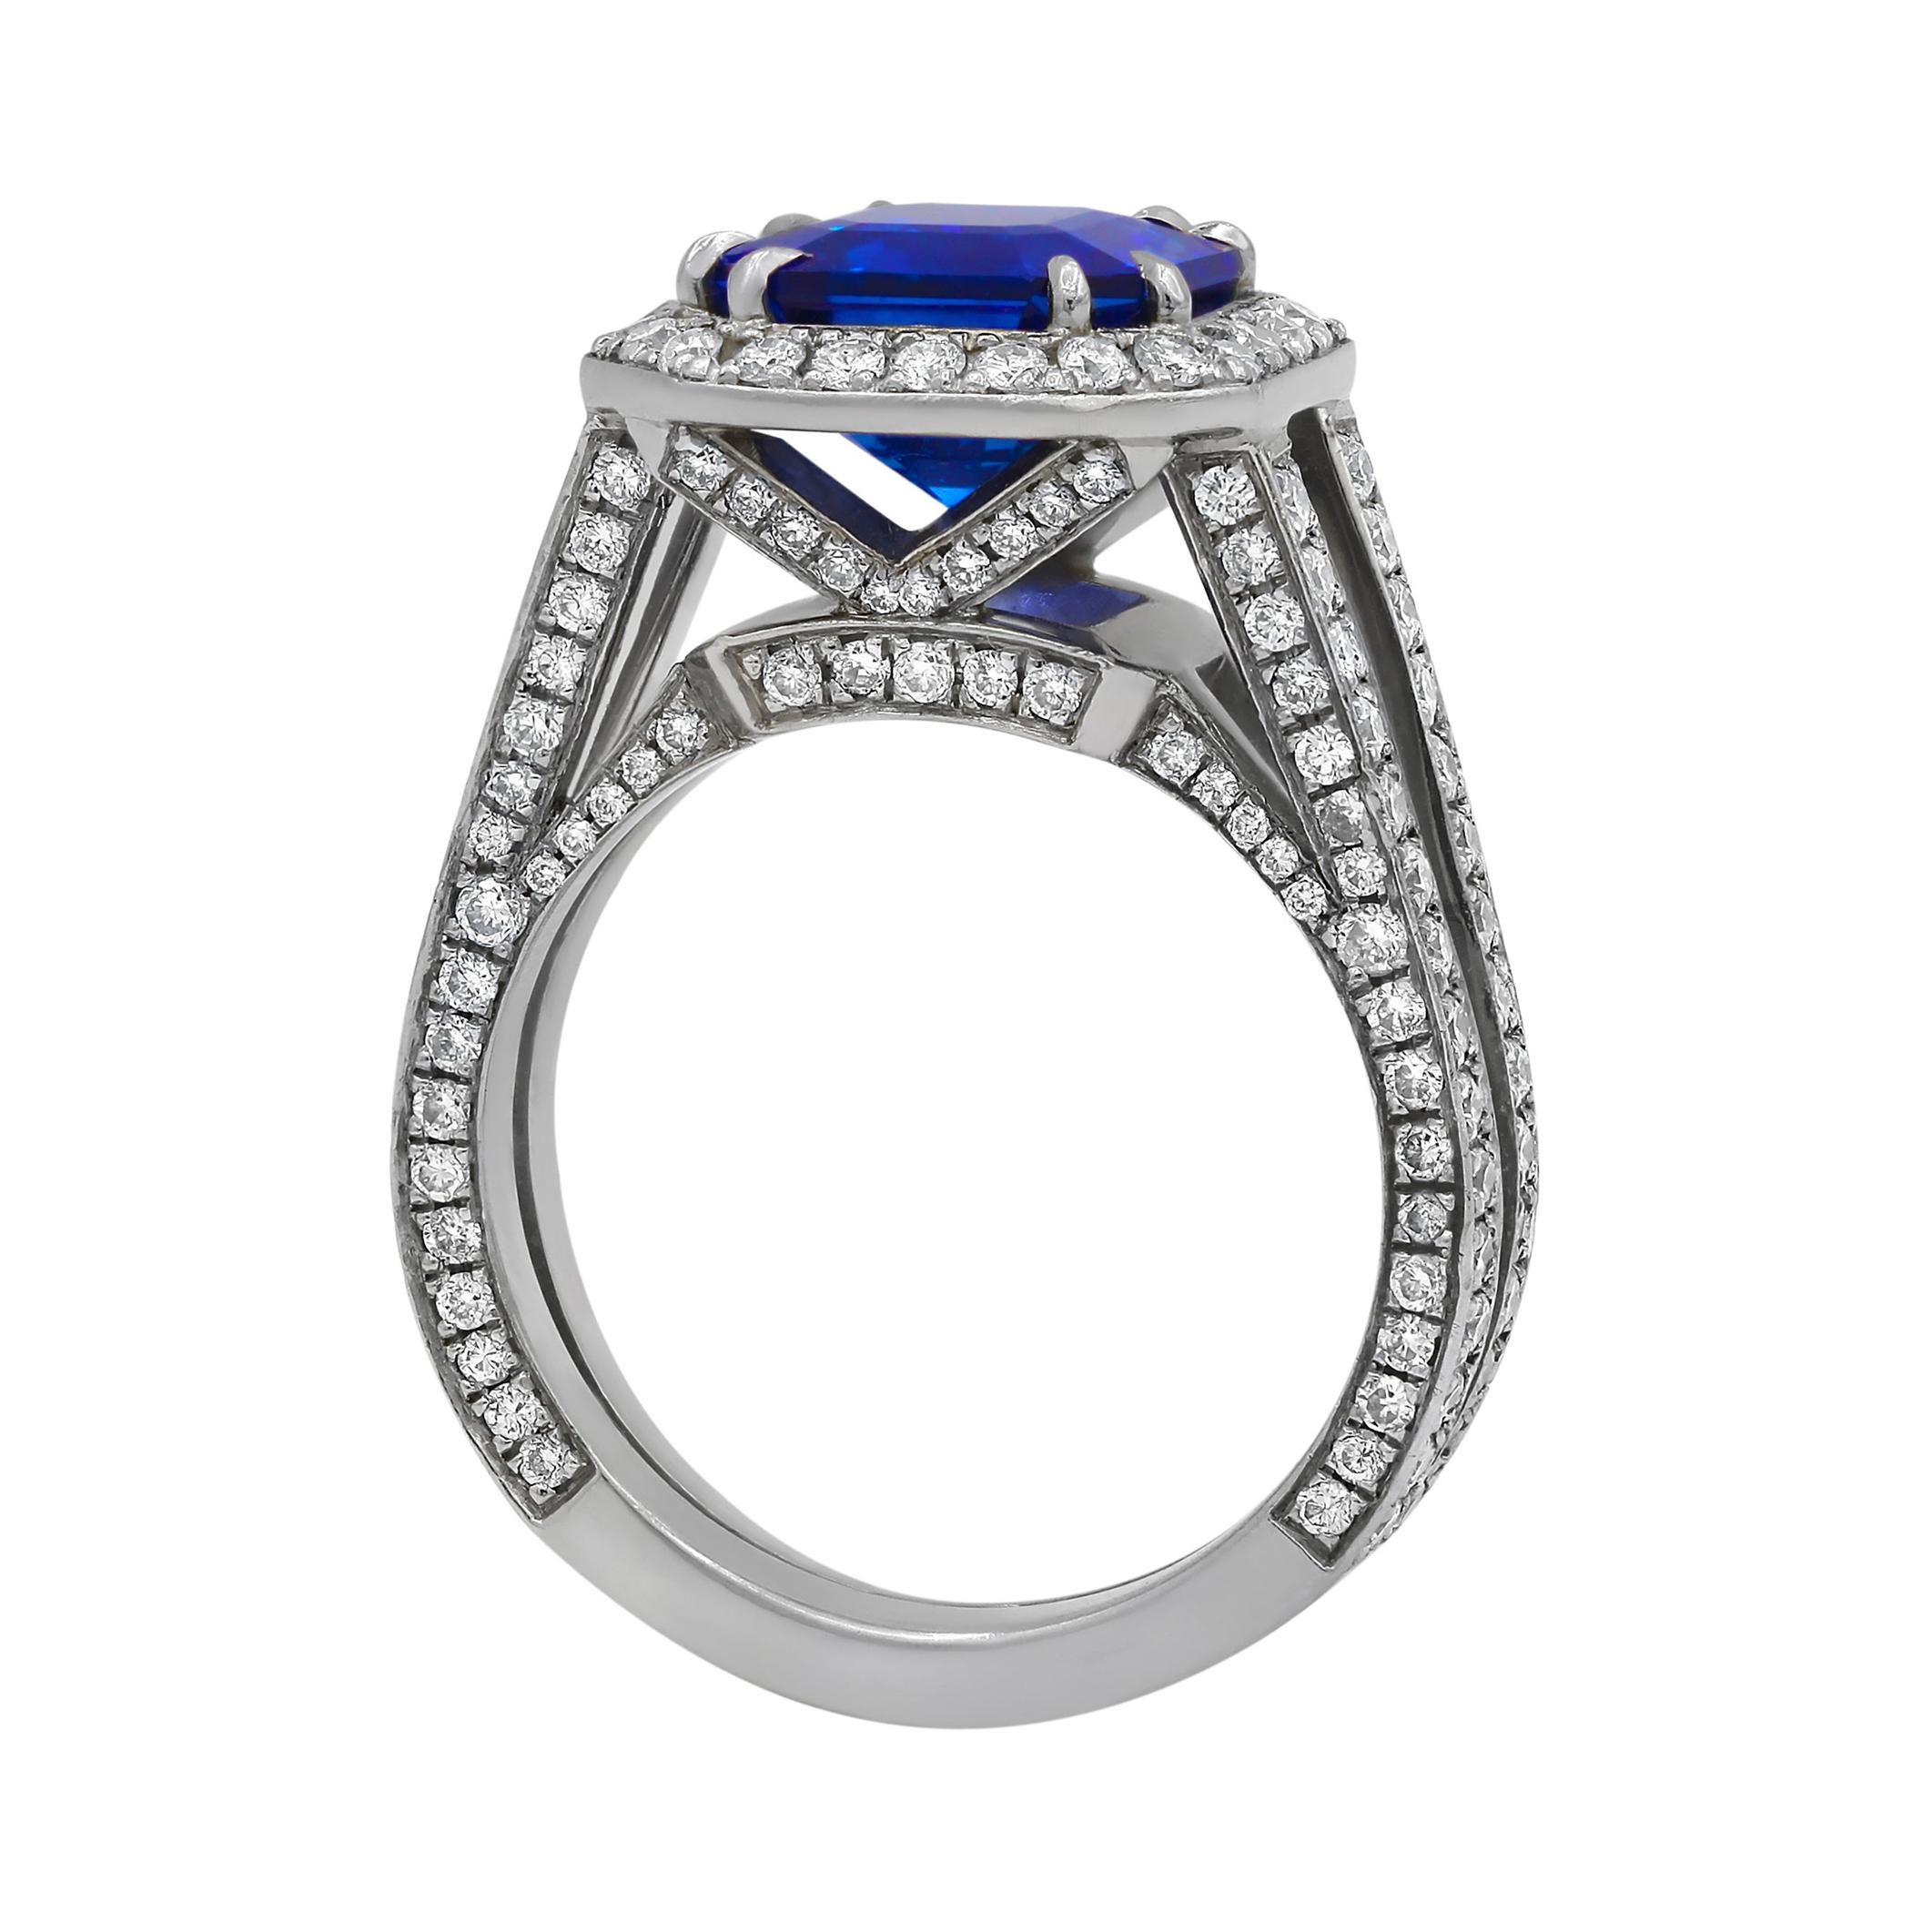 18k white gold sapphire ring features 3.98ct sapphire with 1.20 cts of round diamonds creating halo and split shank
